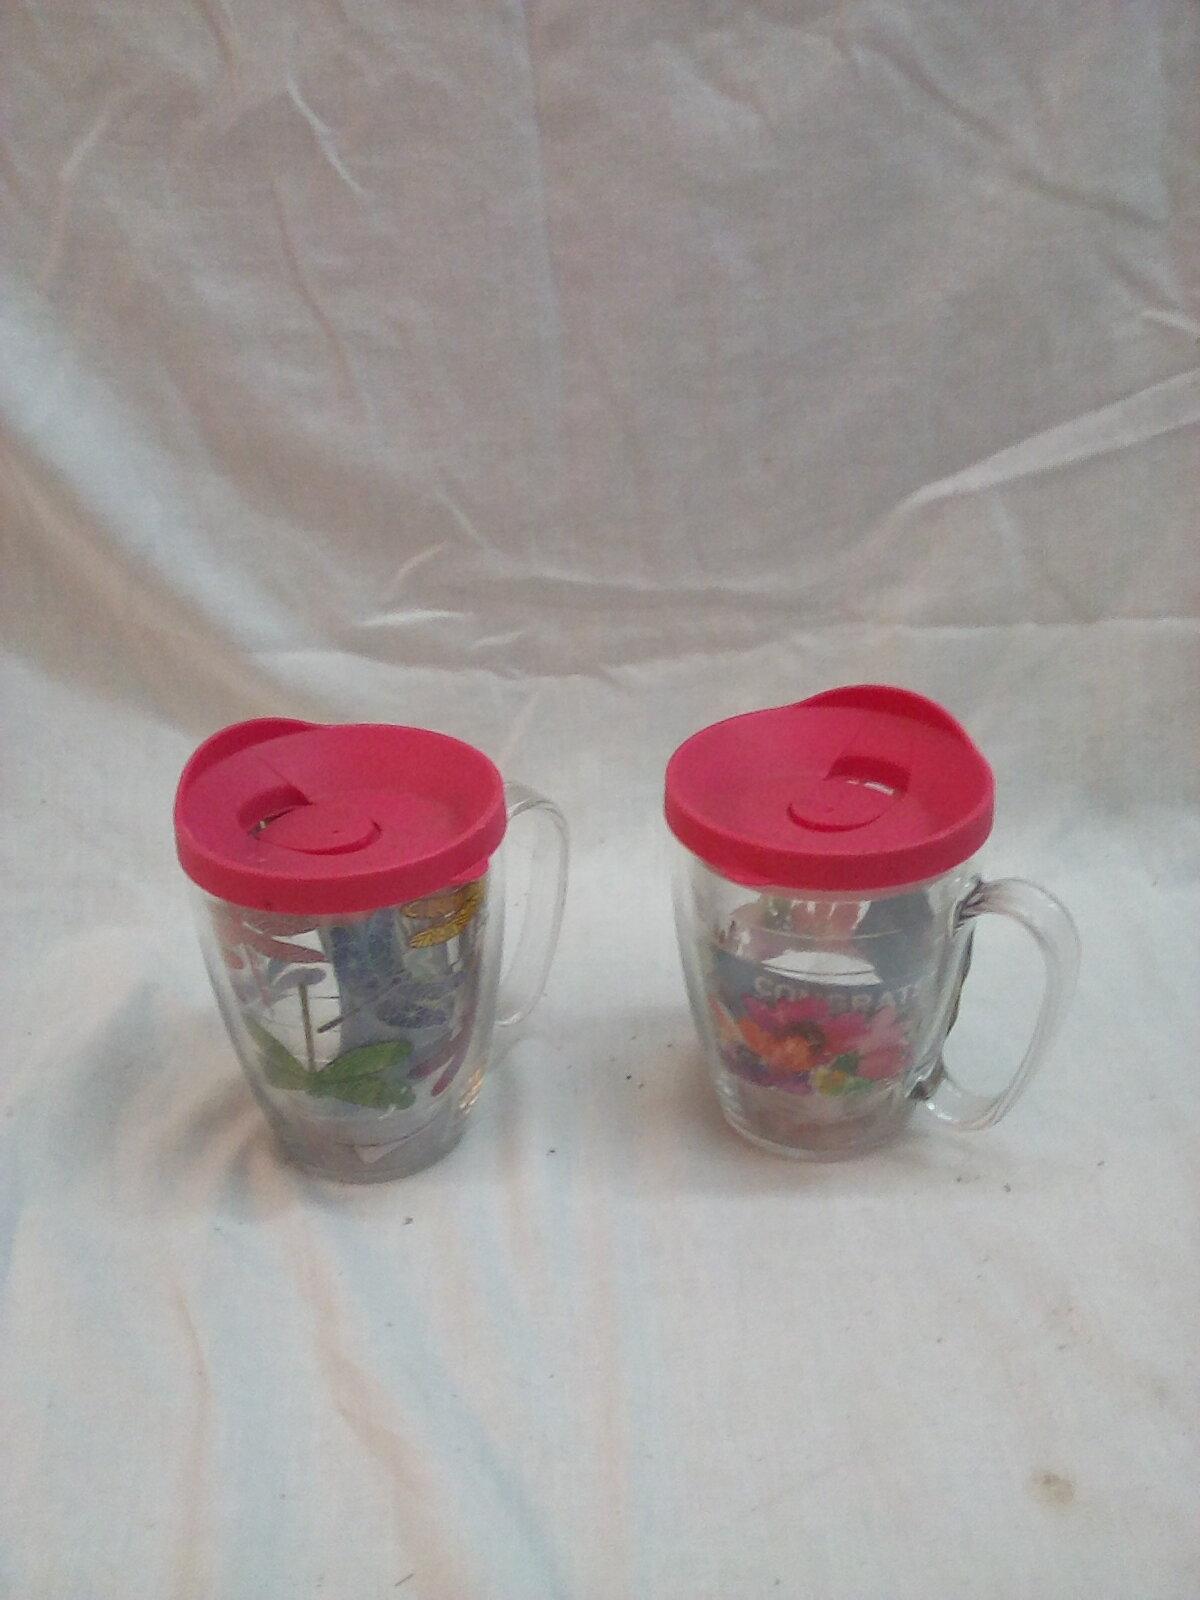 Qty: 2 Tervis “Mom” and Dragonfly Mugs W/ Handle and Lid